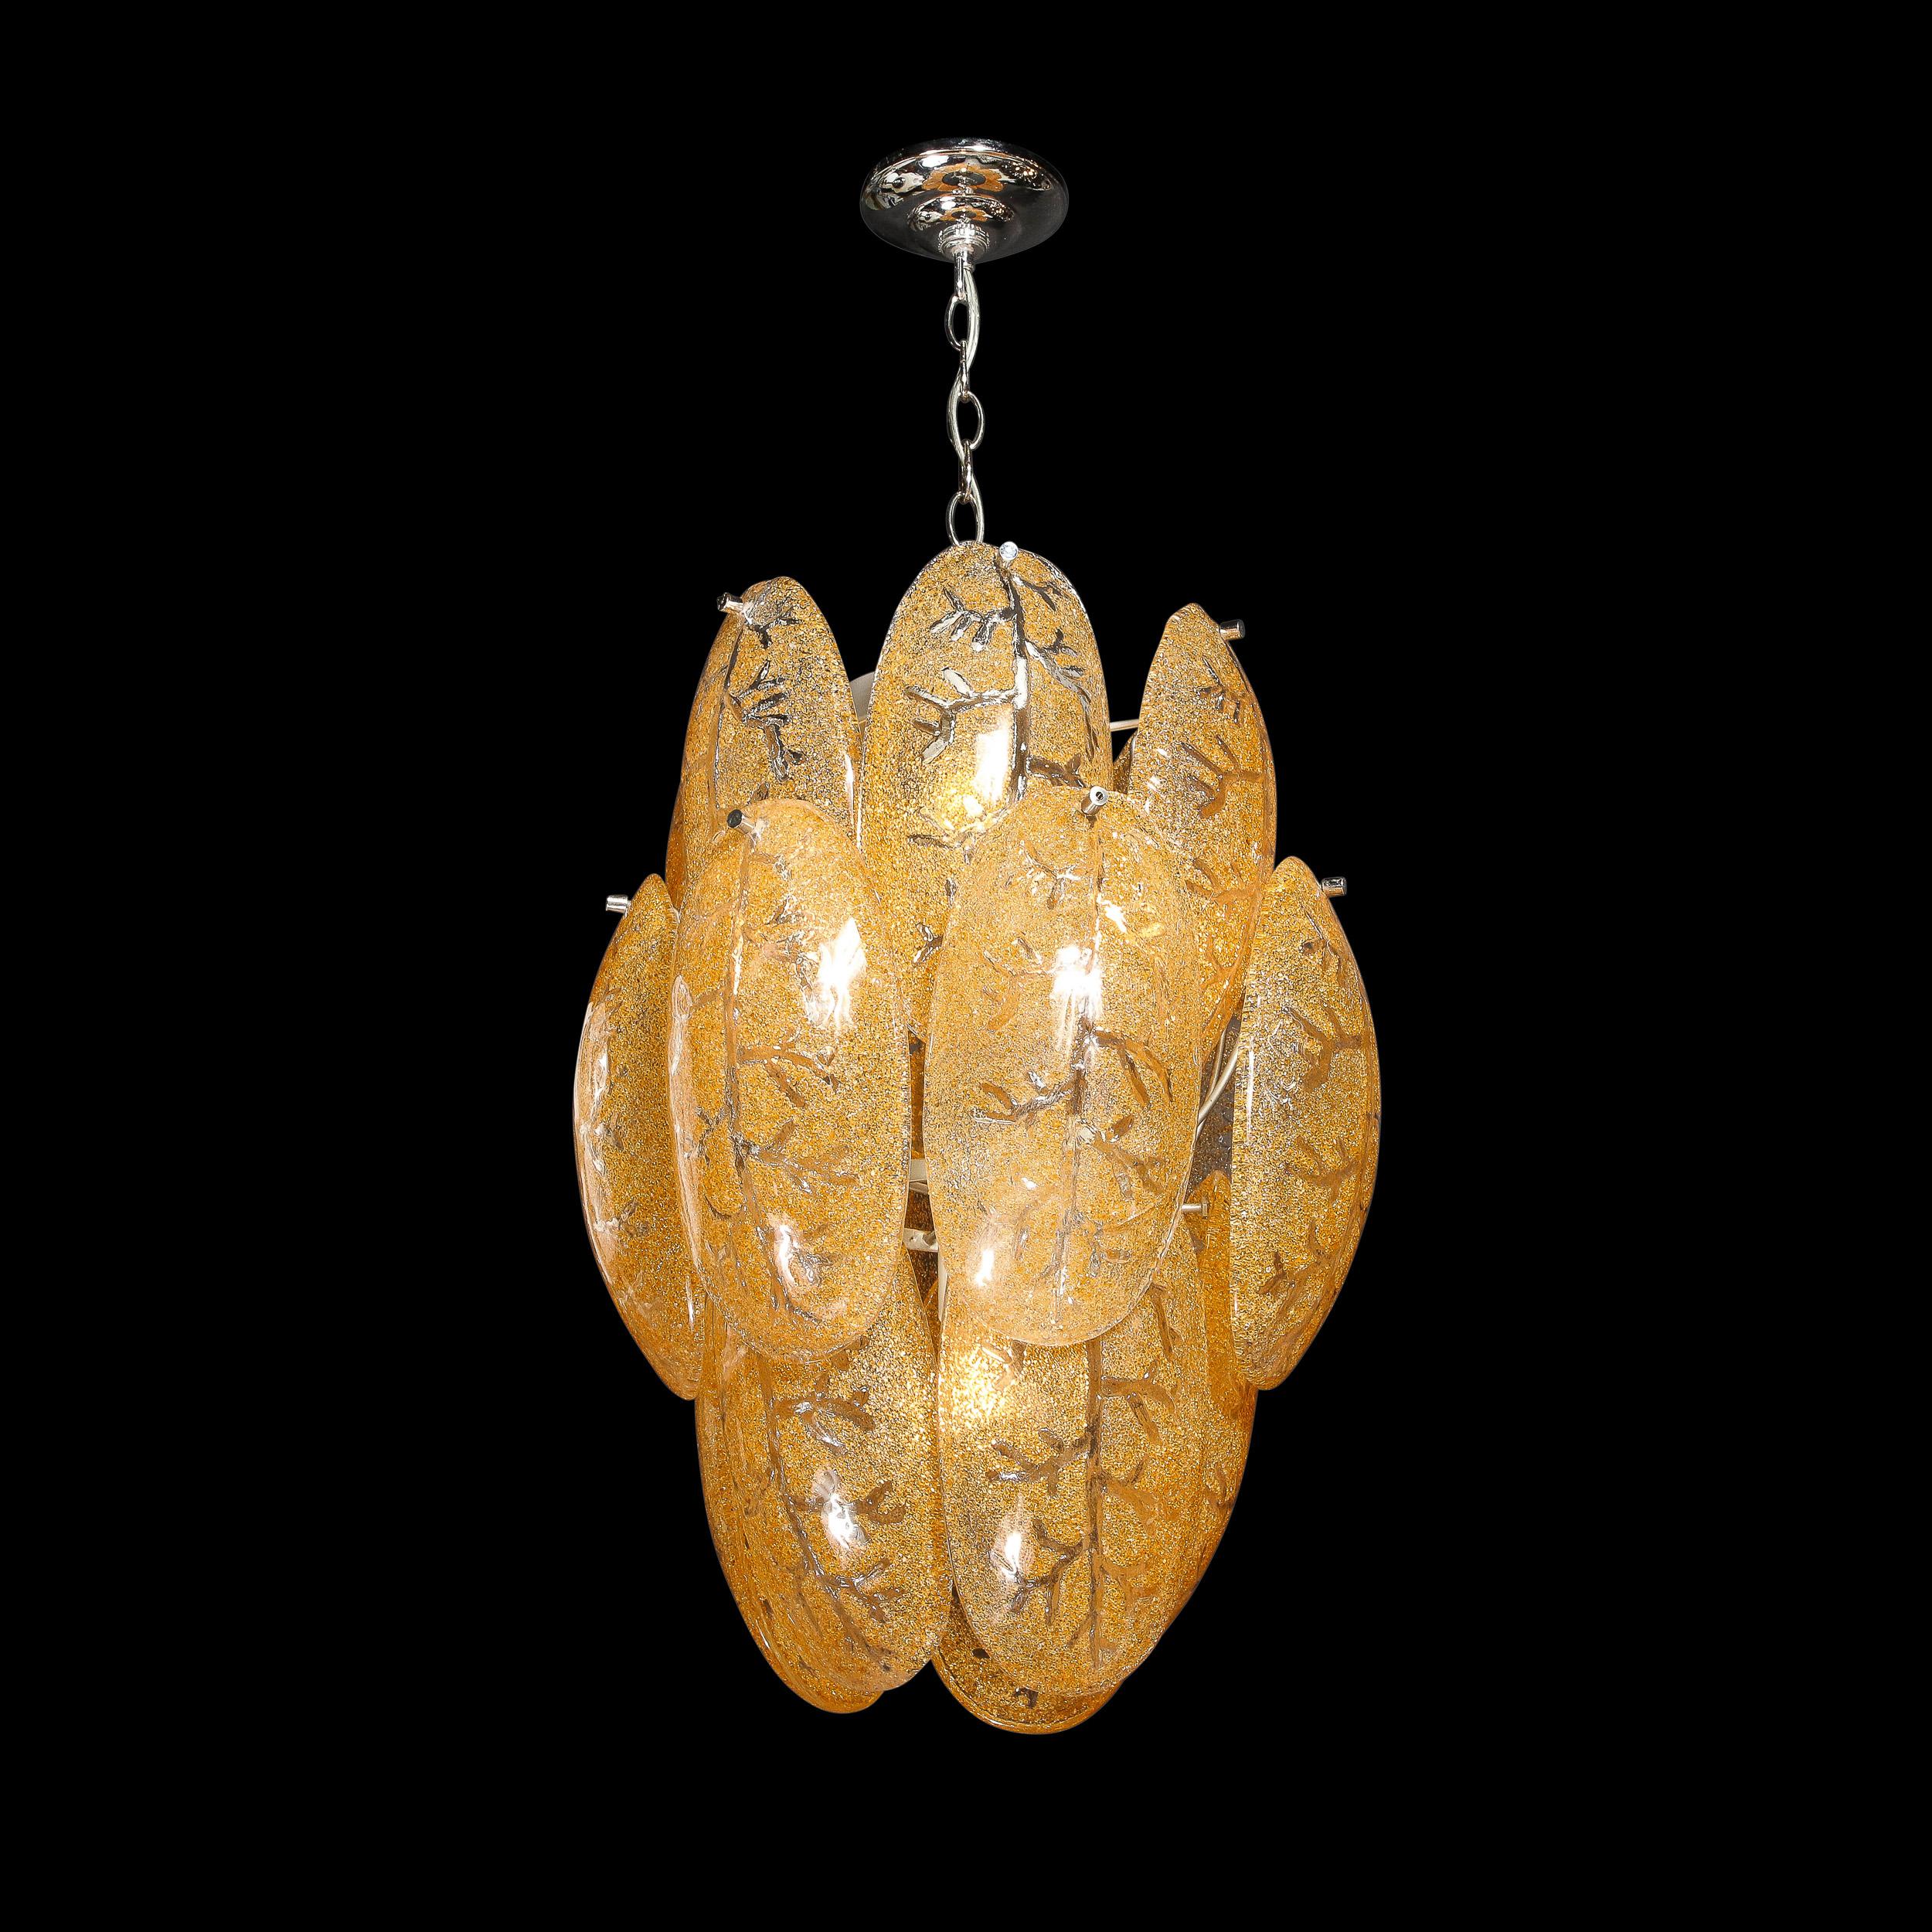 This stunning and impactful Mid-Century Modern chandelier was realized in Murano, Italy- the island off the coast of Venice renowned for centuries for its superlative glass production. It offers three tiers of handblown Murano ovoid leaf form